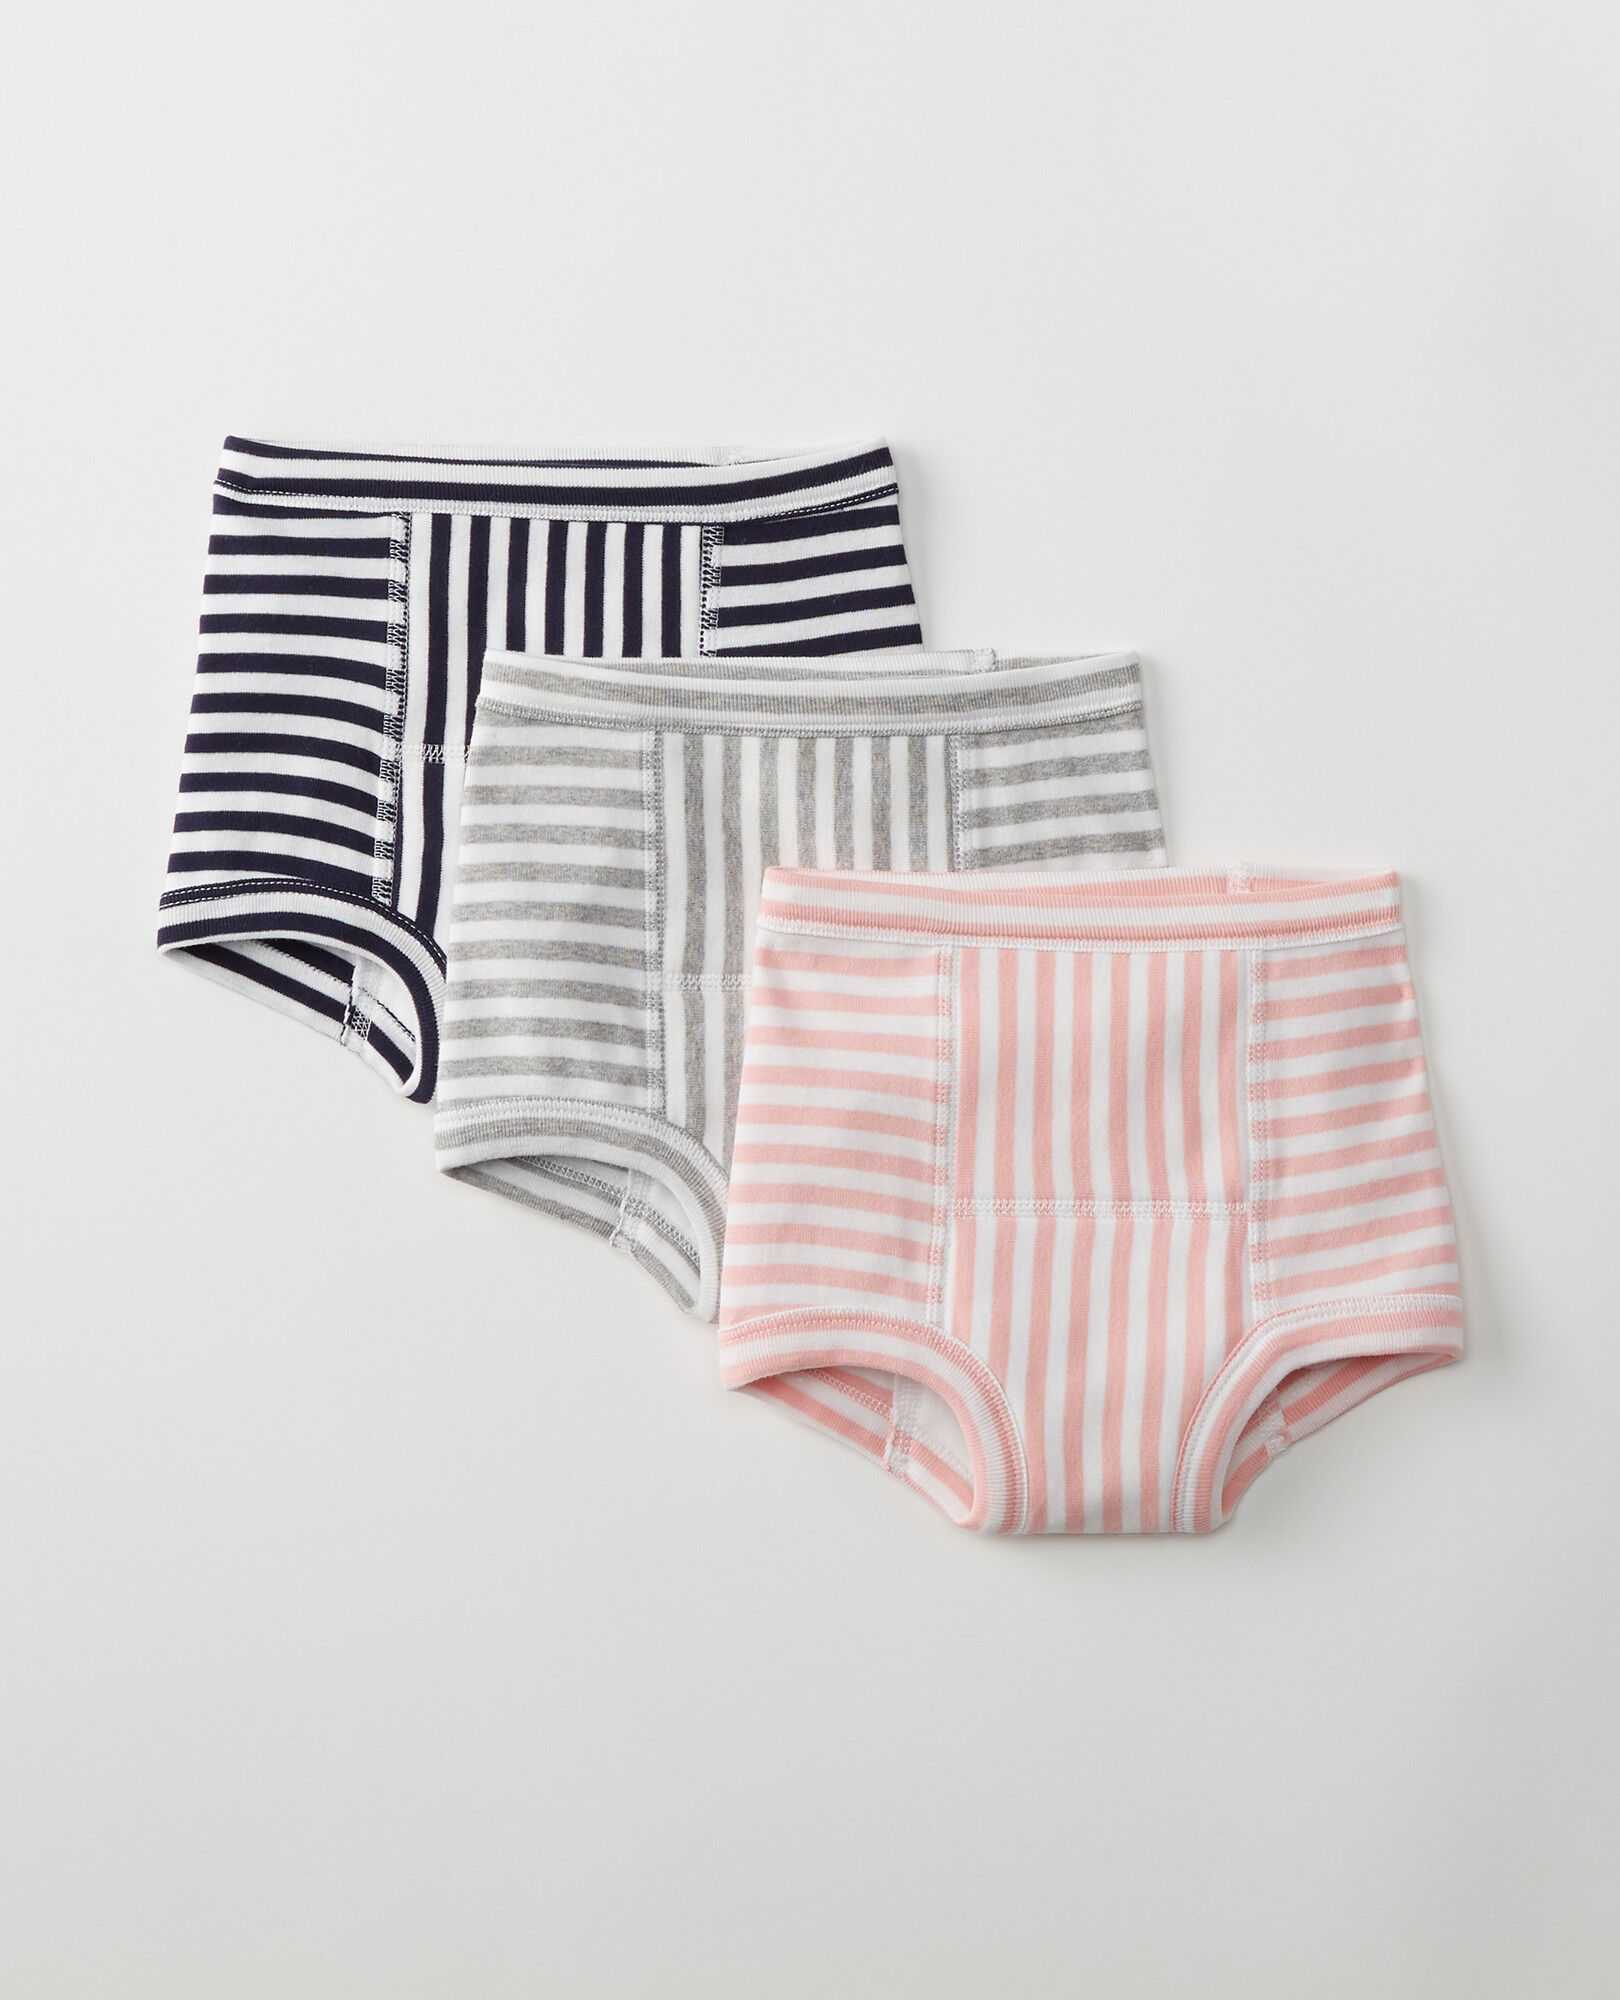 NWT HANNA ANDERSSON ORGANIC TRAINING UNDERS STRIPES 3 PACK XS 80 90 2 3